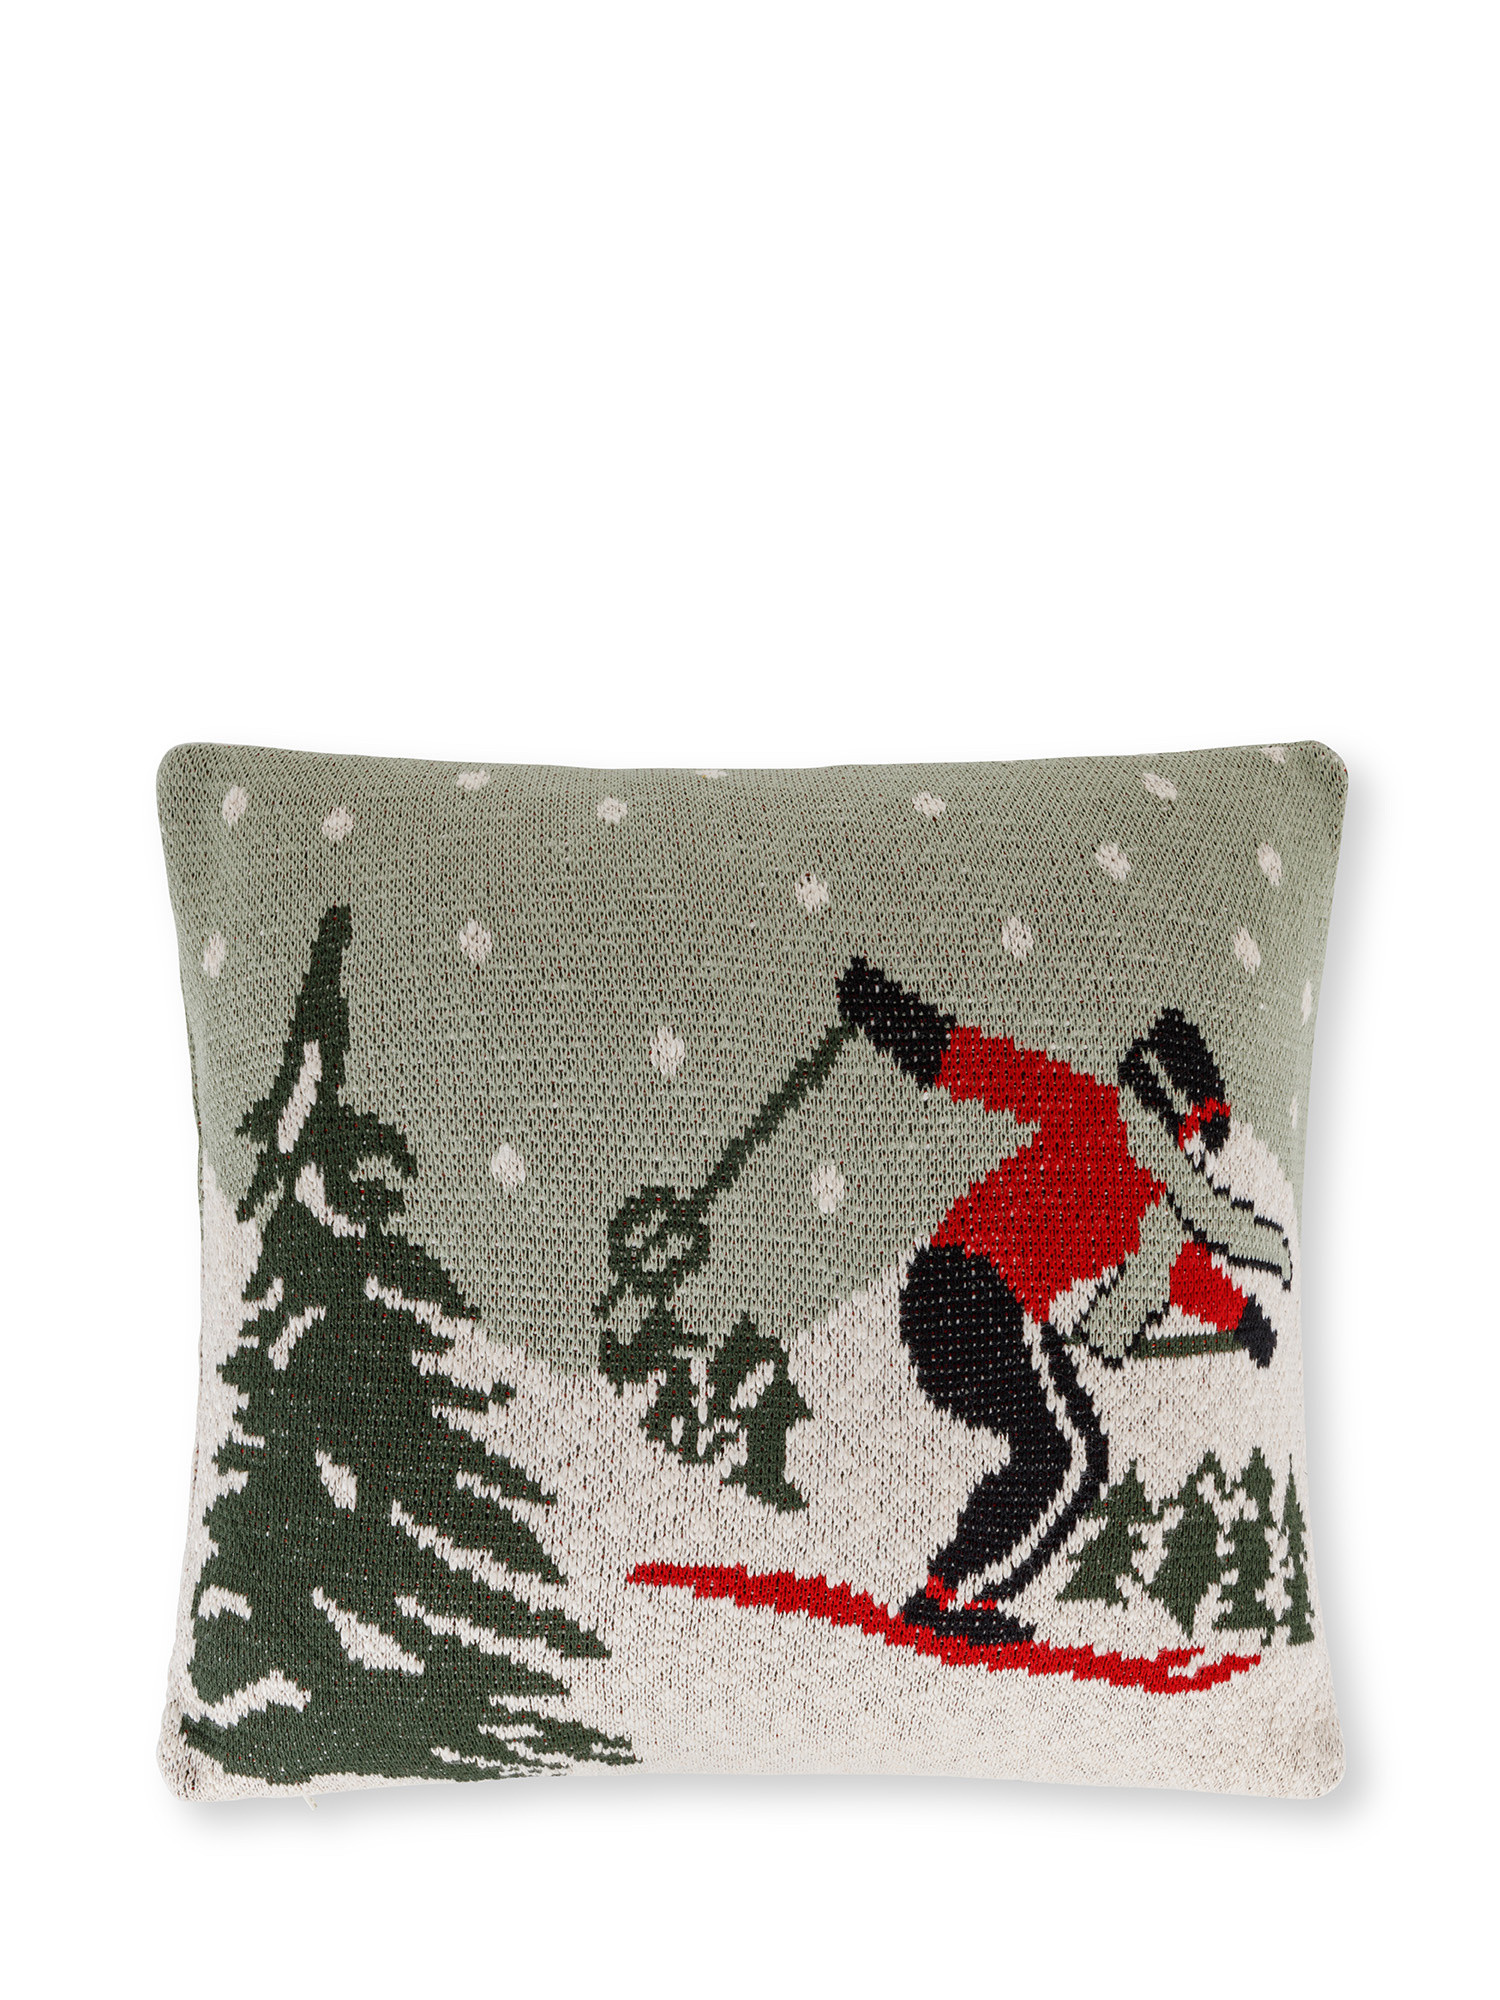 Jacquard knitted cushion with vintage skier motif 45x45 cm, Grey, large image number 0